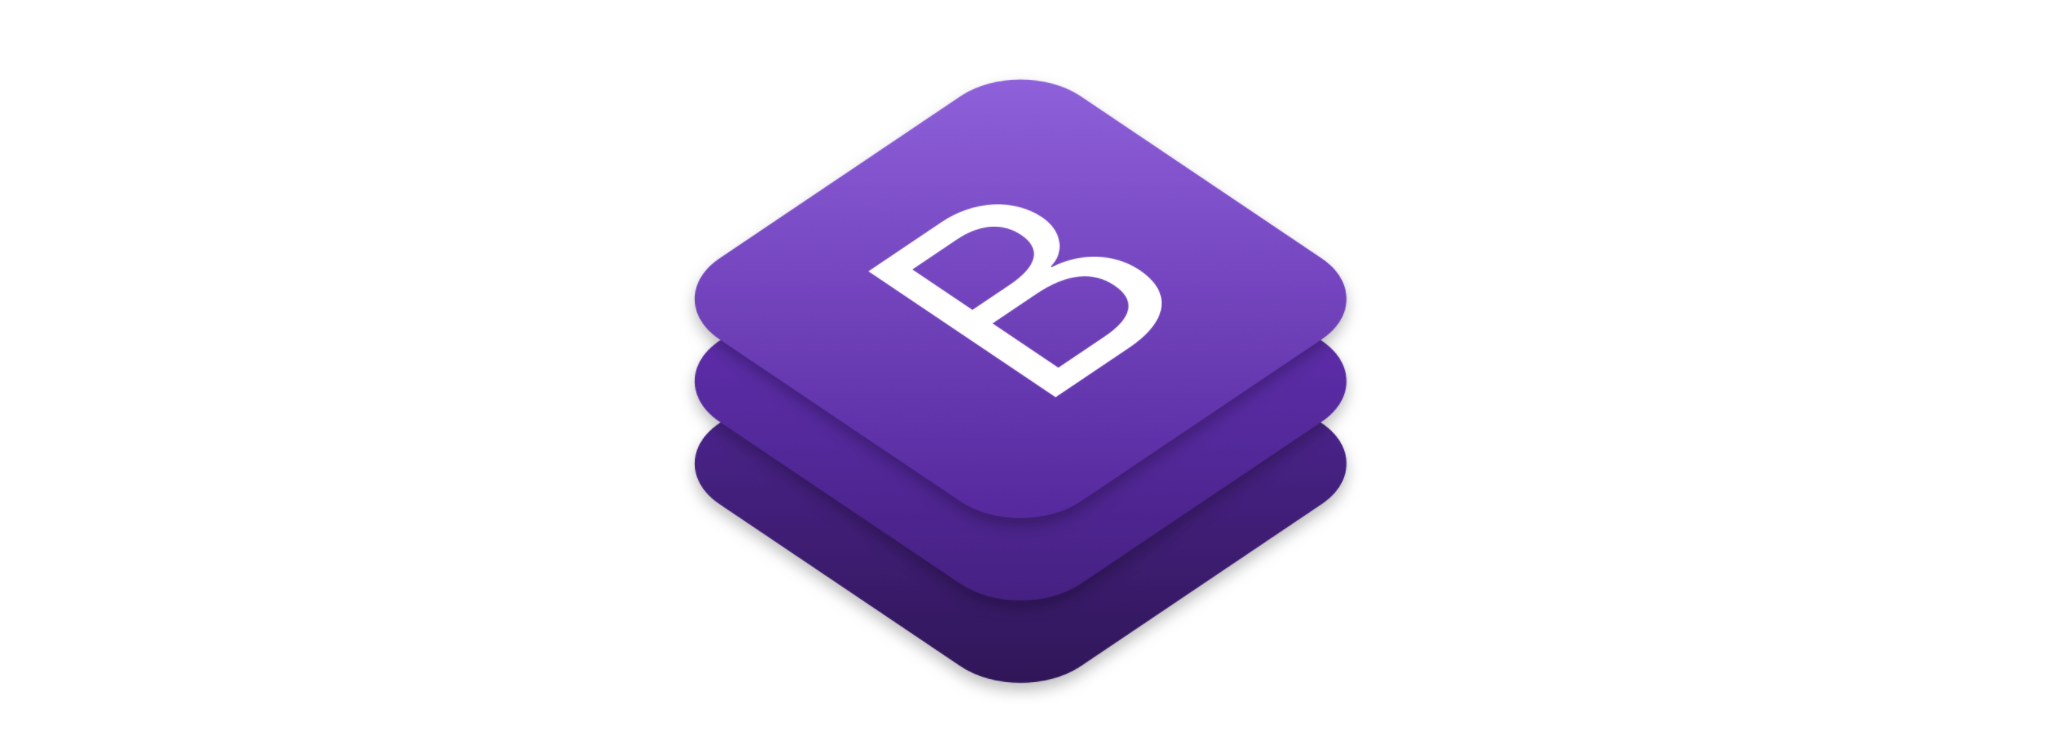 Customizing Bootstrap 4 without changing the core files